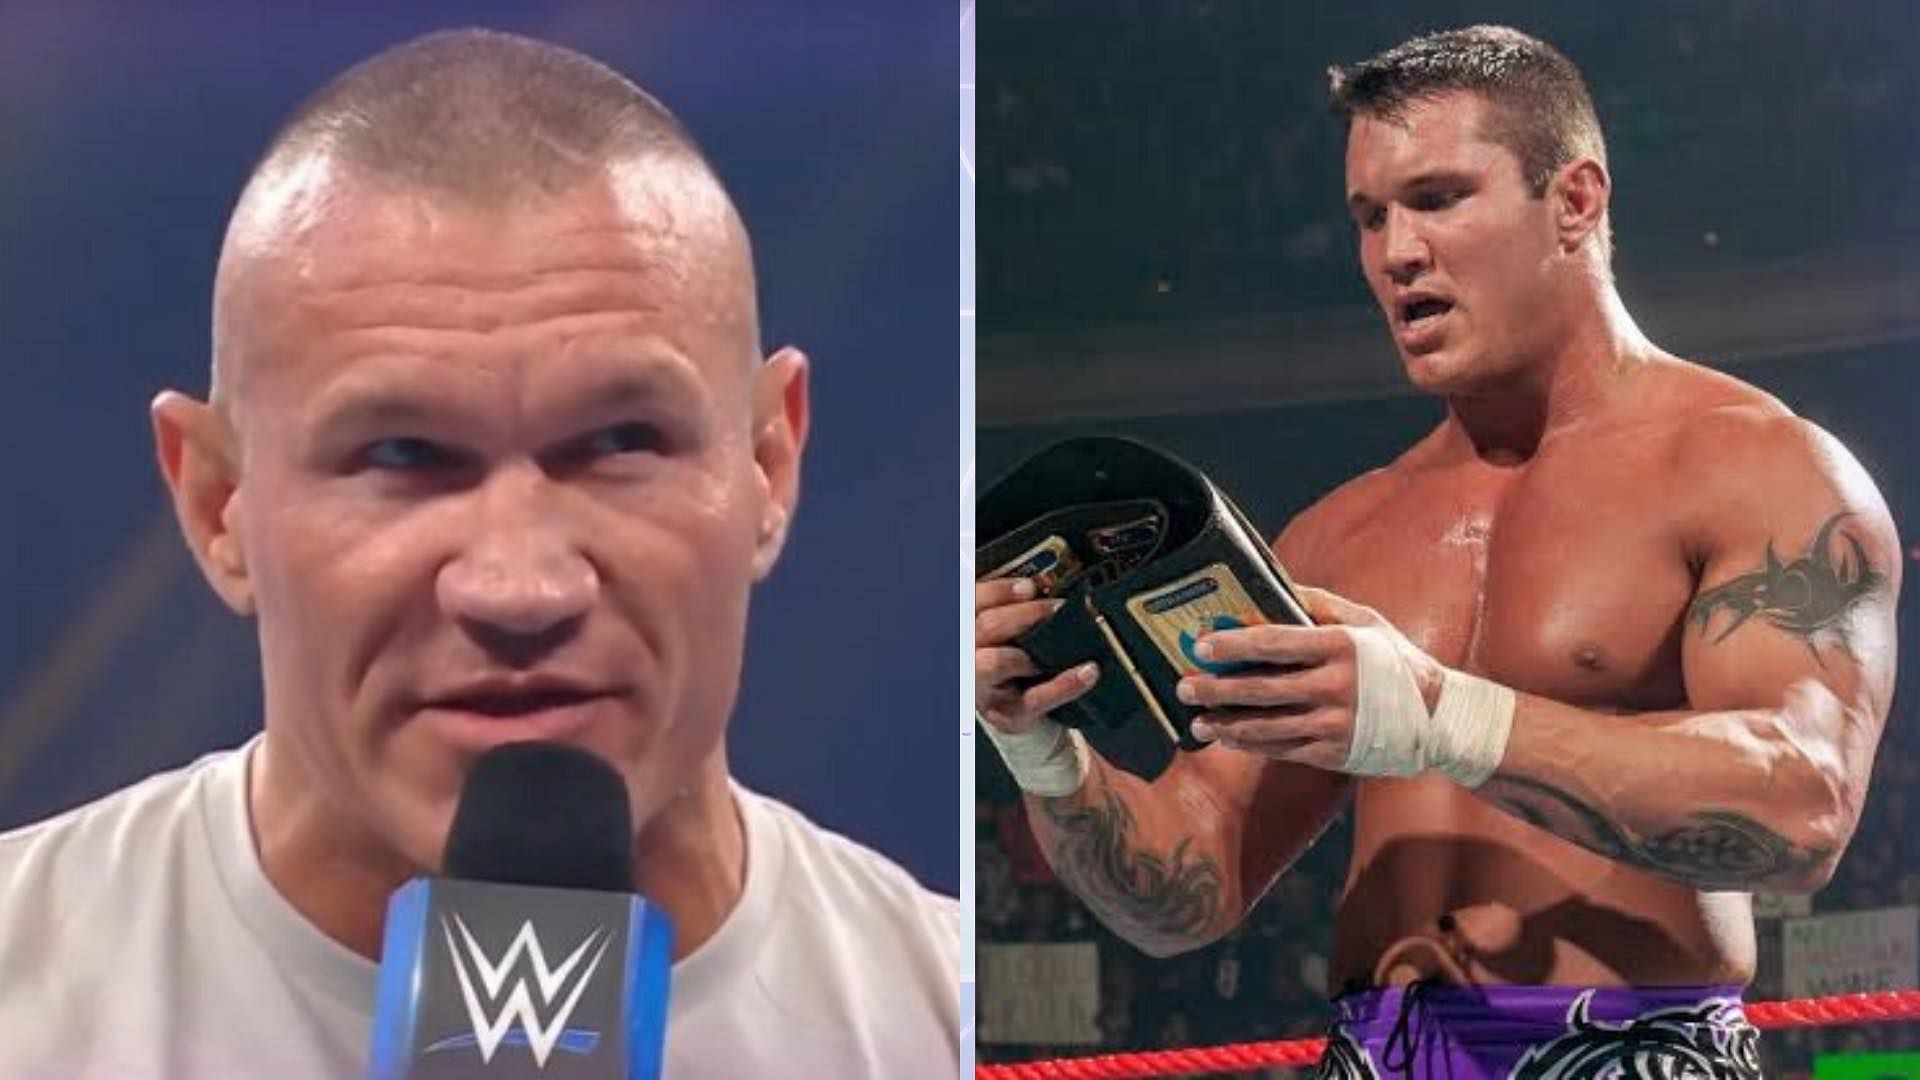 Randy Orton is a 14-time World Champion in WWE.